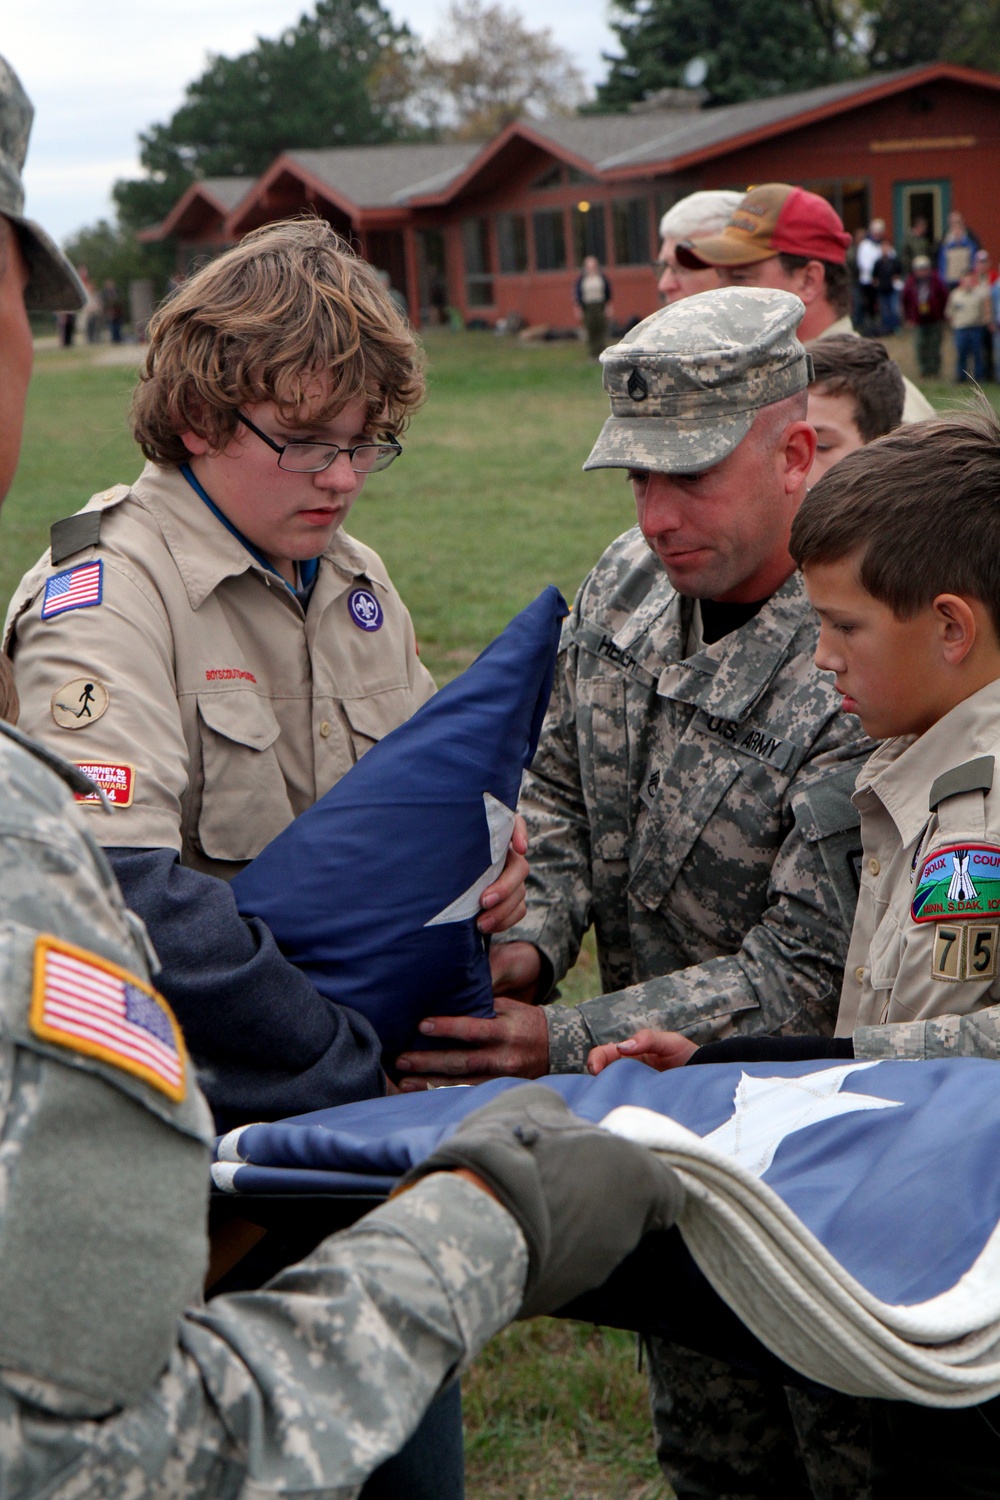 Soldiers help Boy Scouts find strength within